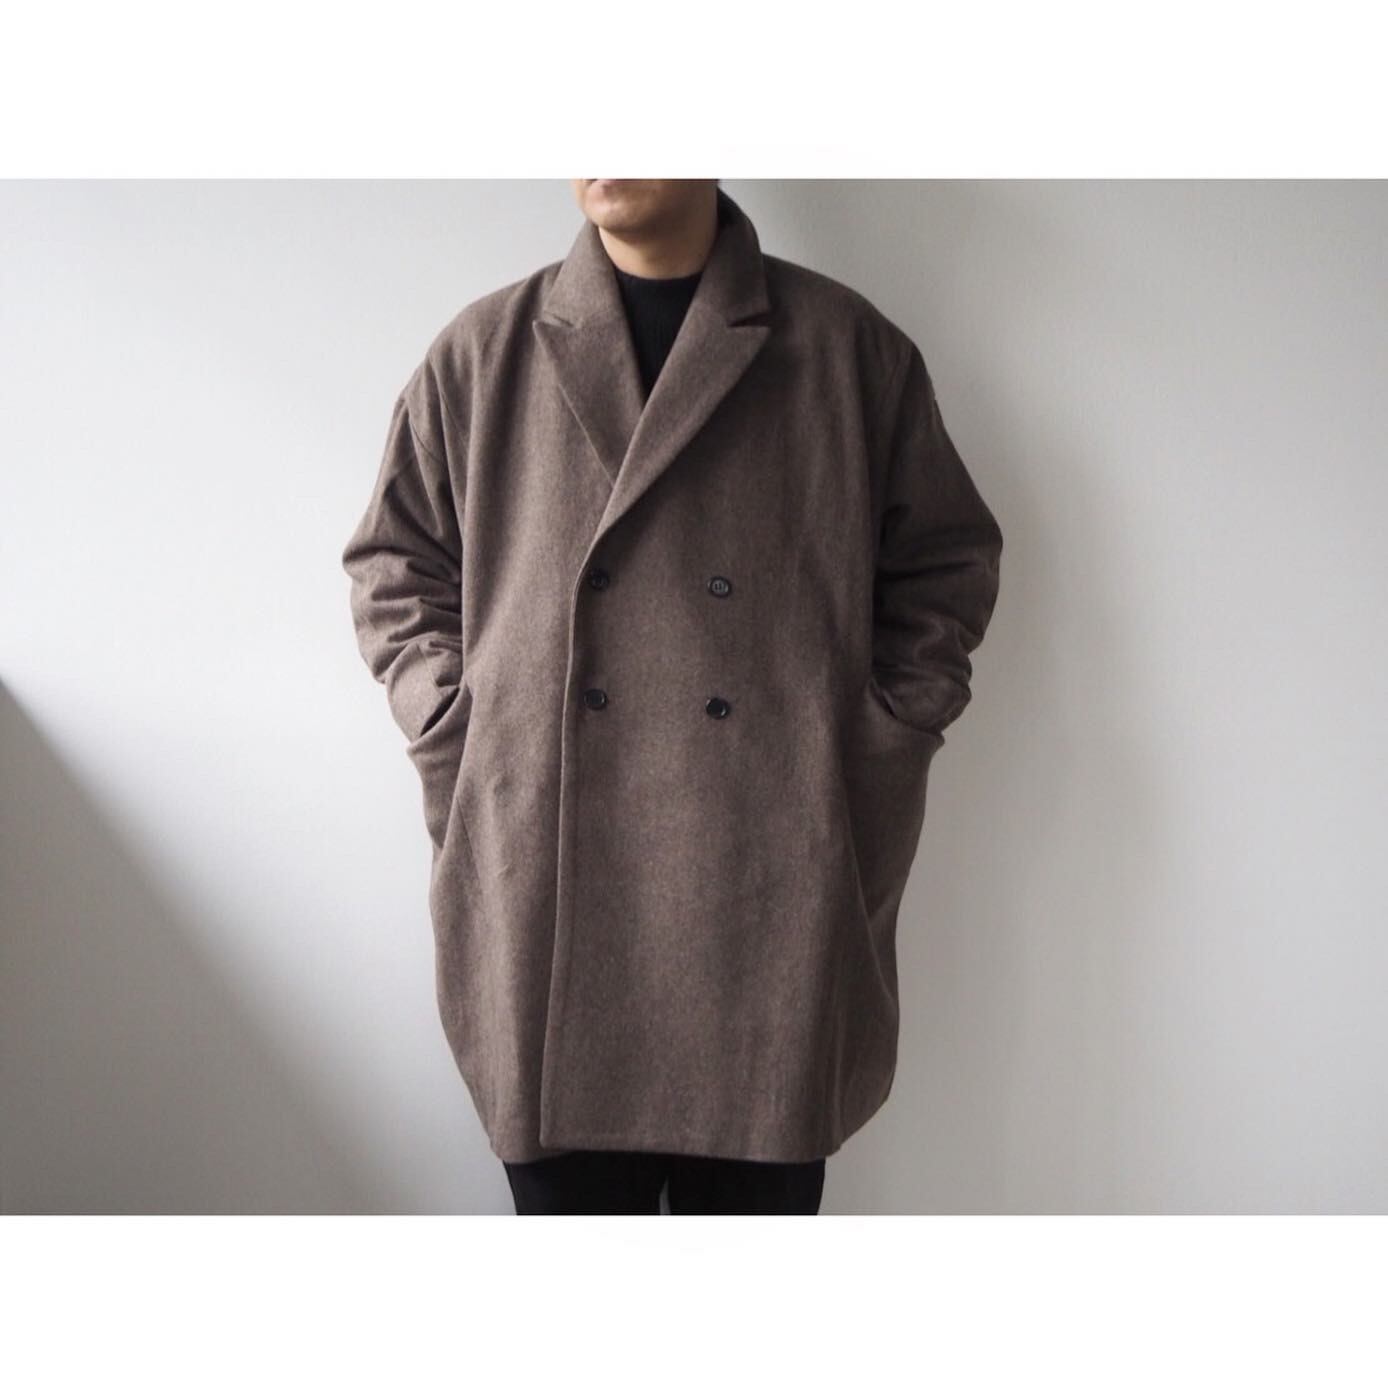 BASISBROEK (バージスブルック) 『EGG』 Wool Double Coat | AUTHENTIC Life Store powered  by BASE